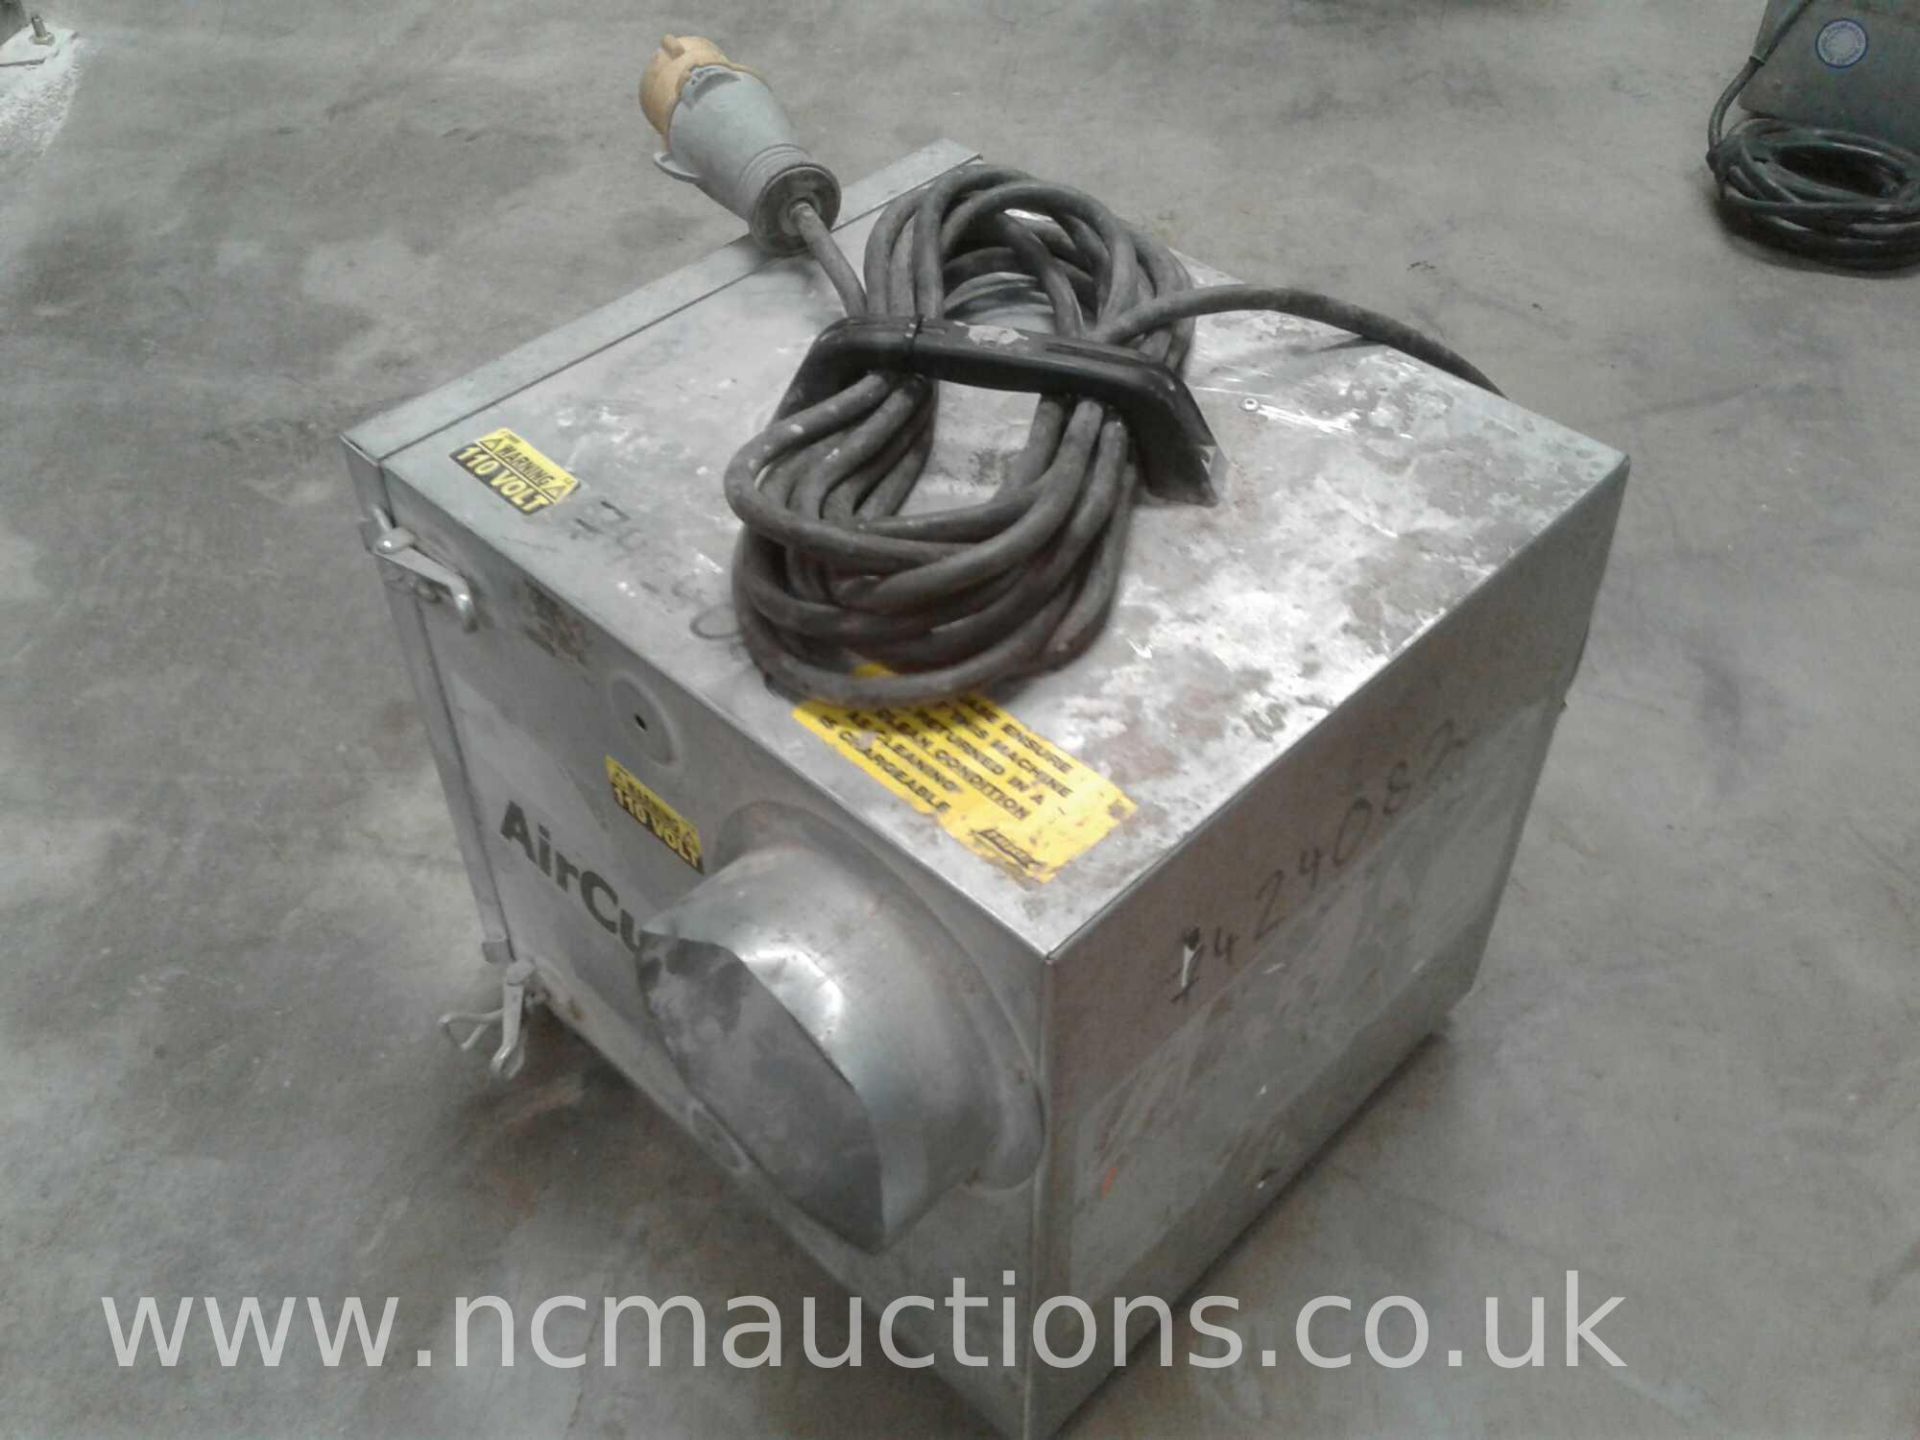 Air cube dust extraction unit 110v